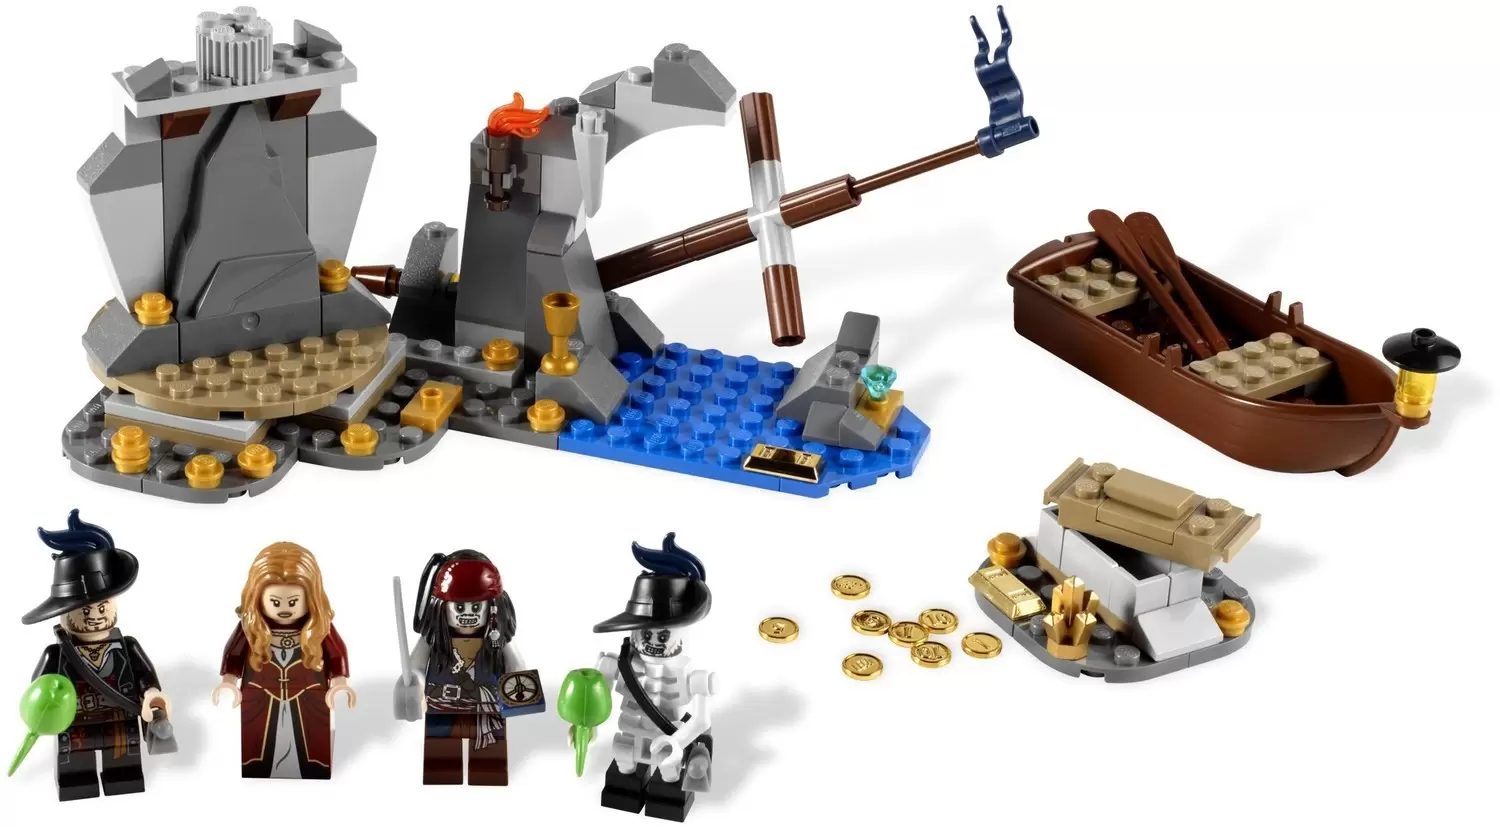 Isla De Muerta Lego Poster Only Pirates of the Caribbean Poster 